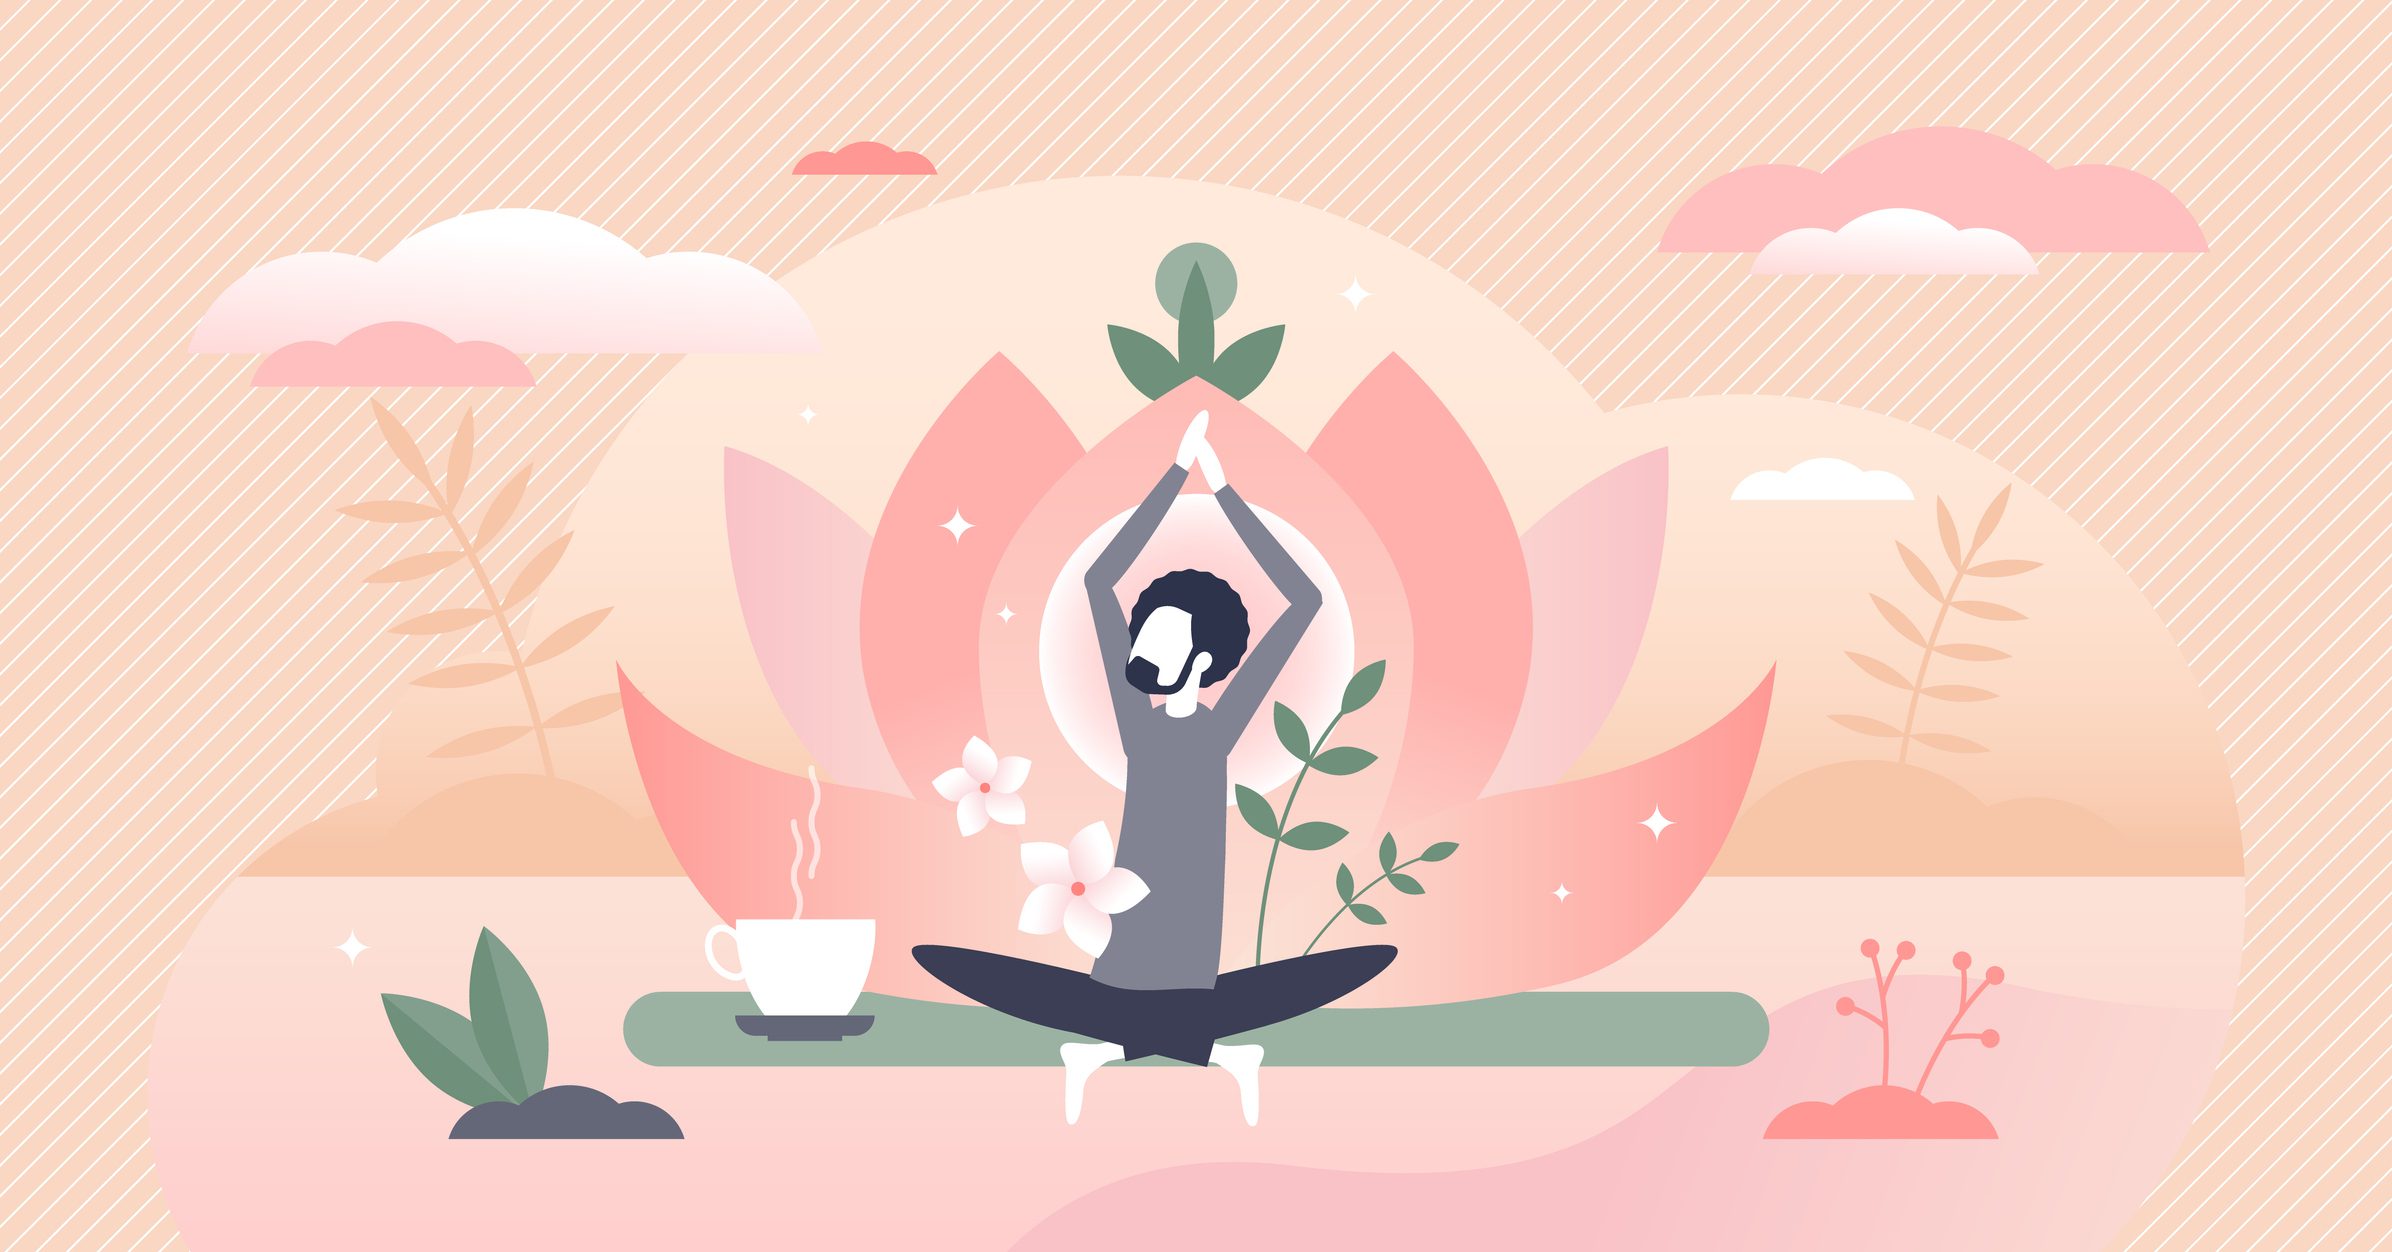 Holistic healing as man soul meditation and inner peace tiny person concept. Healthy male relaxation as body and mind treatment vector illustration. Spiritual wellness lifestyle with yoga harmony.